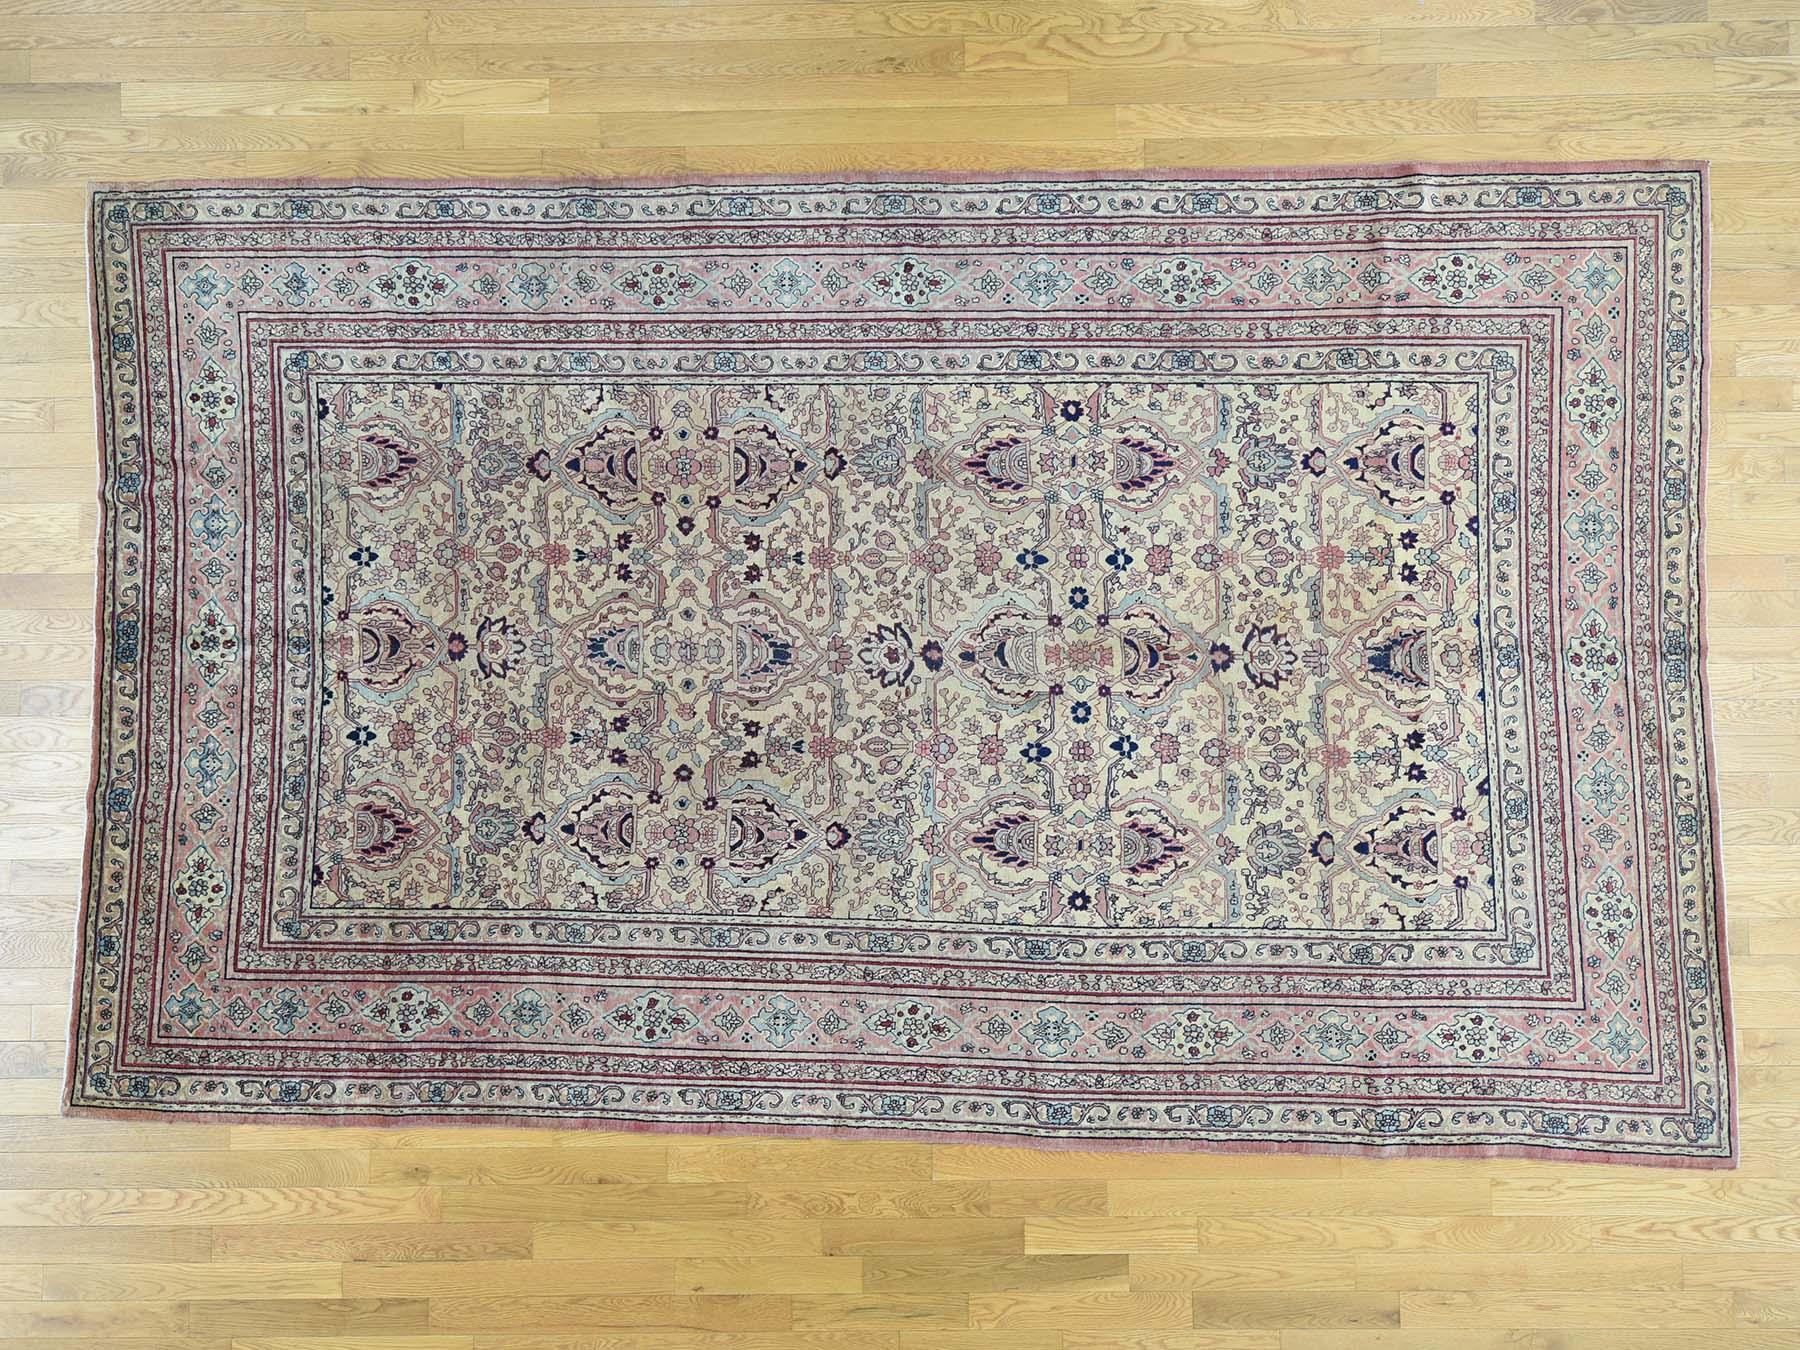 This is a genuine hand knotted oriental rug. It is not hand tufted or machine made rug. Our entire inventory is made of either hand knotted or handwoven rugs.

Adorn your house style with this splendid antique carpet. This handcrafted Turkish Sivas,